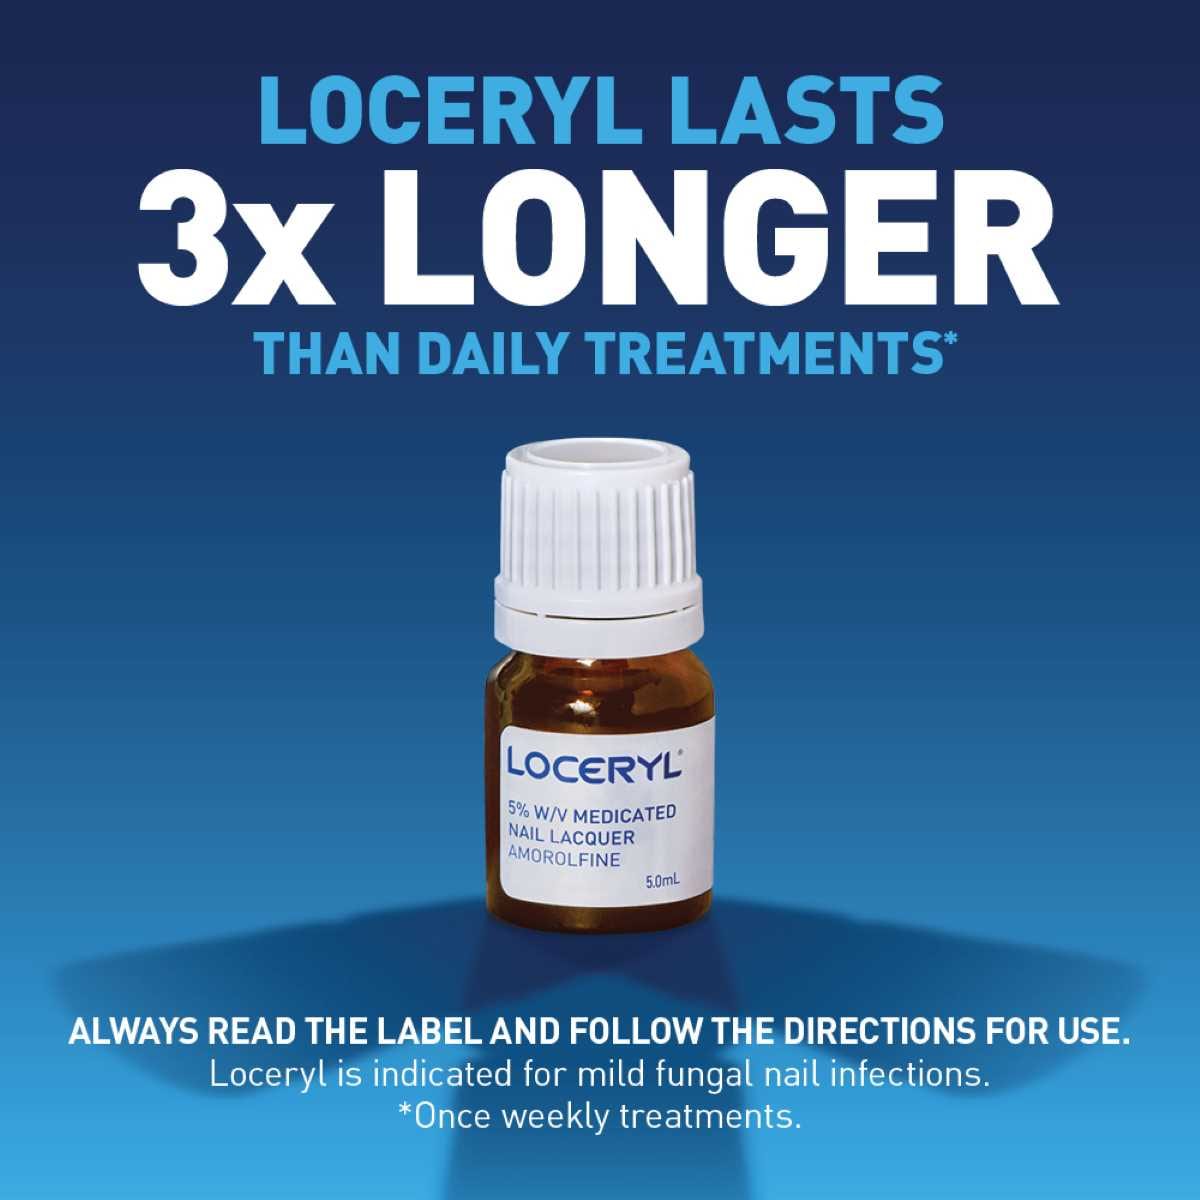 LOCERYL NAIL LACQUER - Proven and Effective Anti-Fungal Nail Treatment For  Nail Fungus Infection! | Lazada Singapore